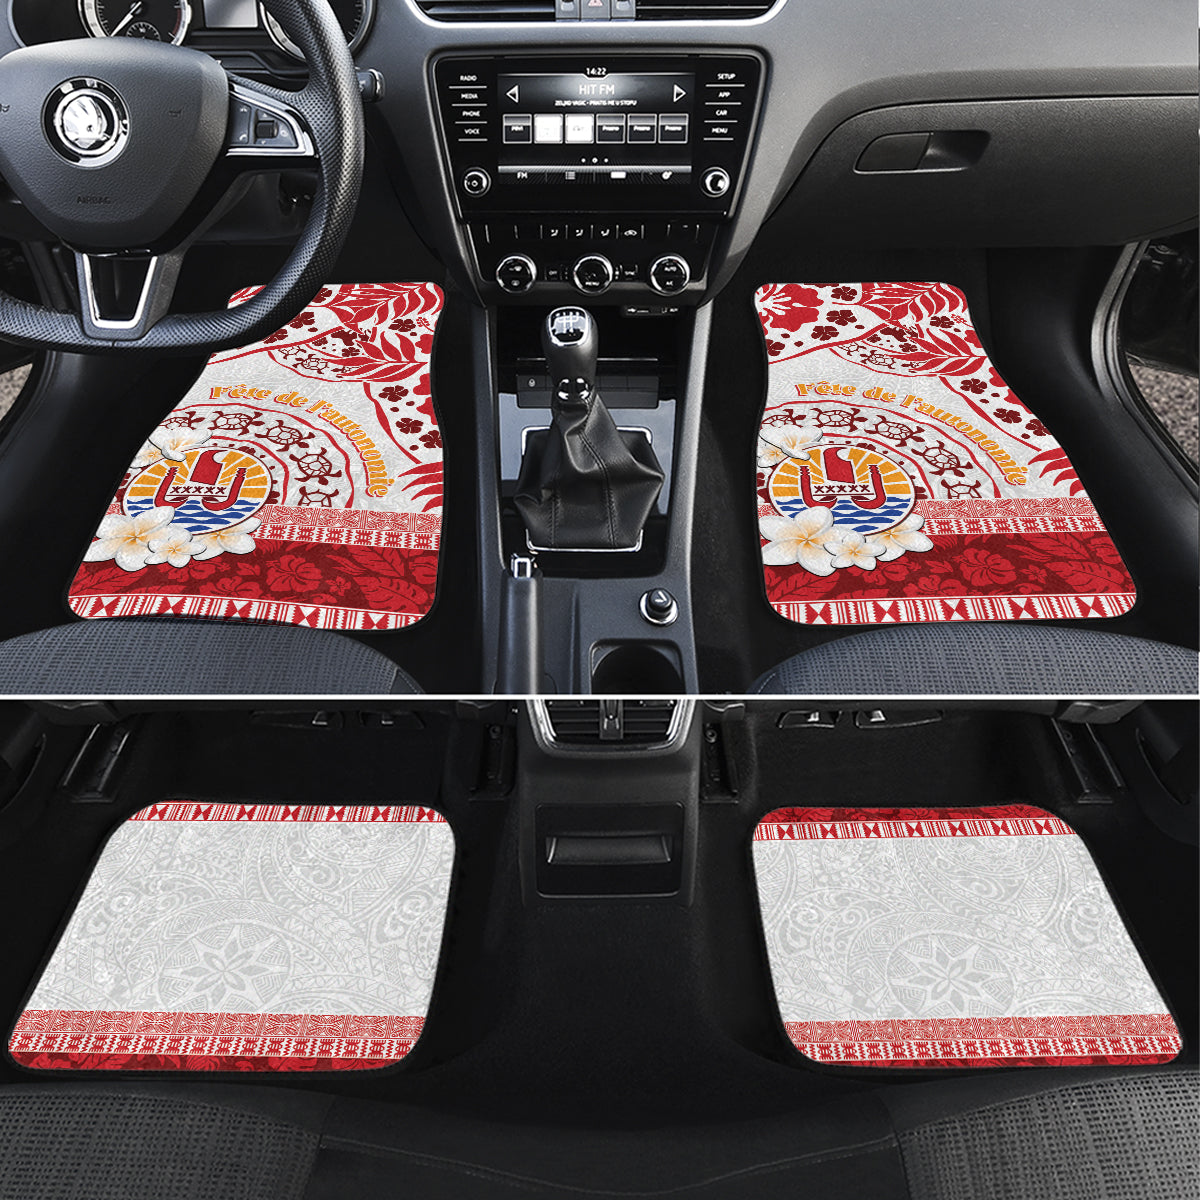 French Polynesia Internal Autonomy Day Car Mats Tropical Hibiscus And Turtle Pattern